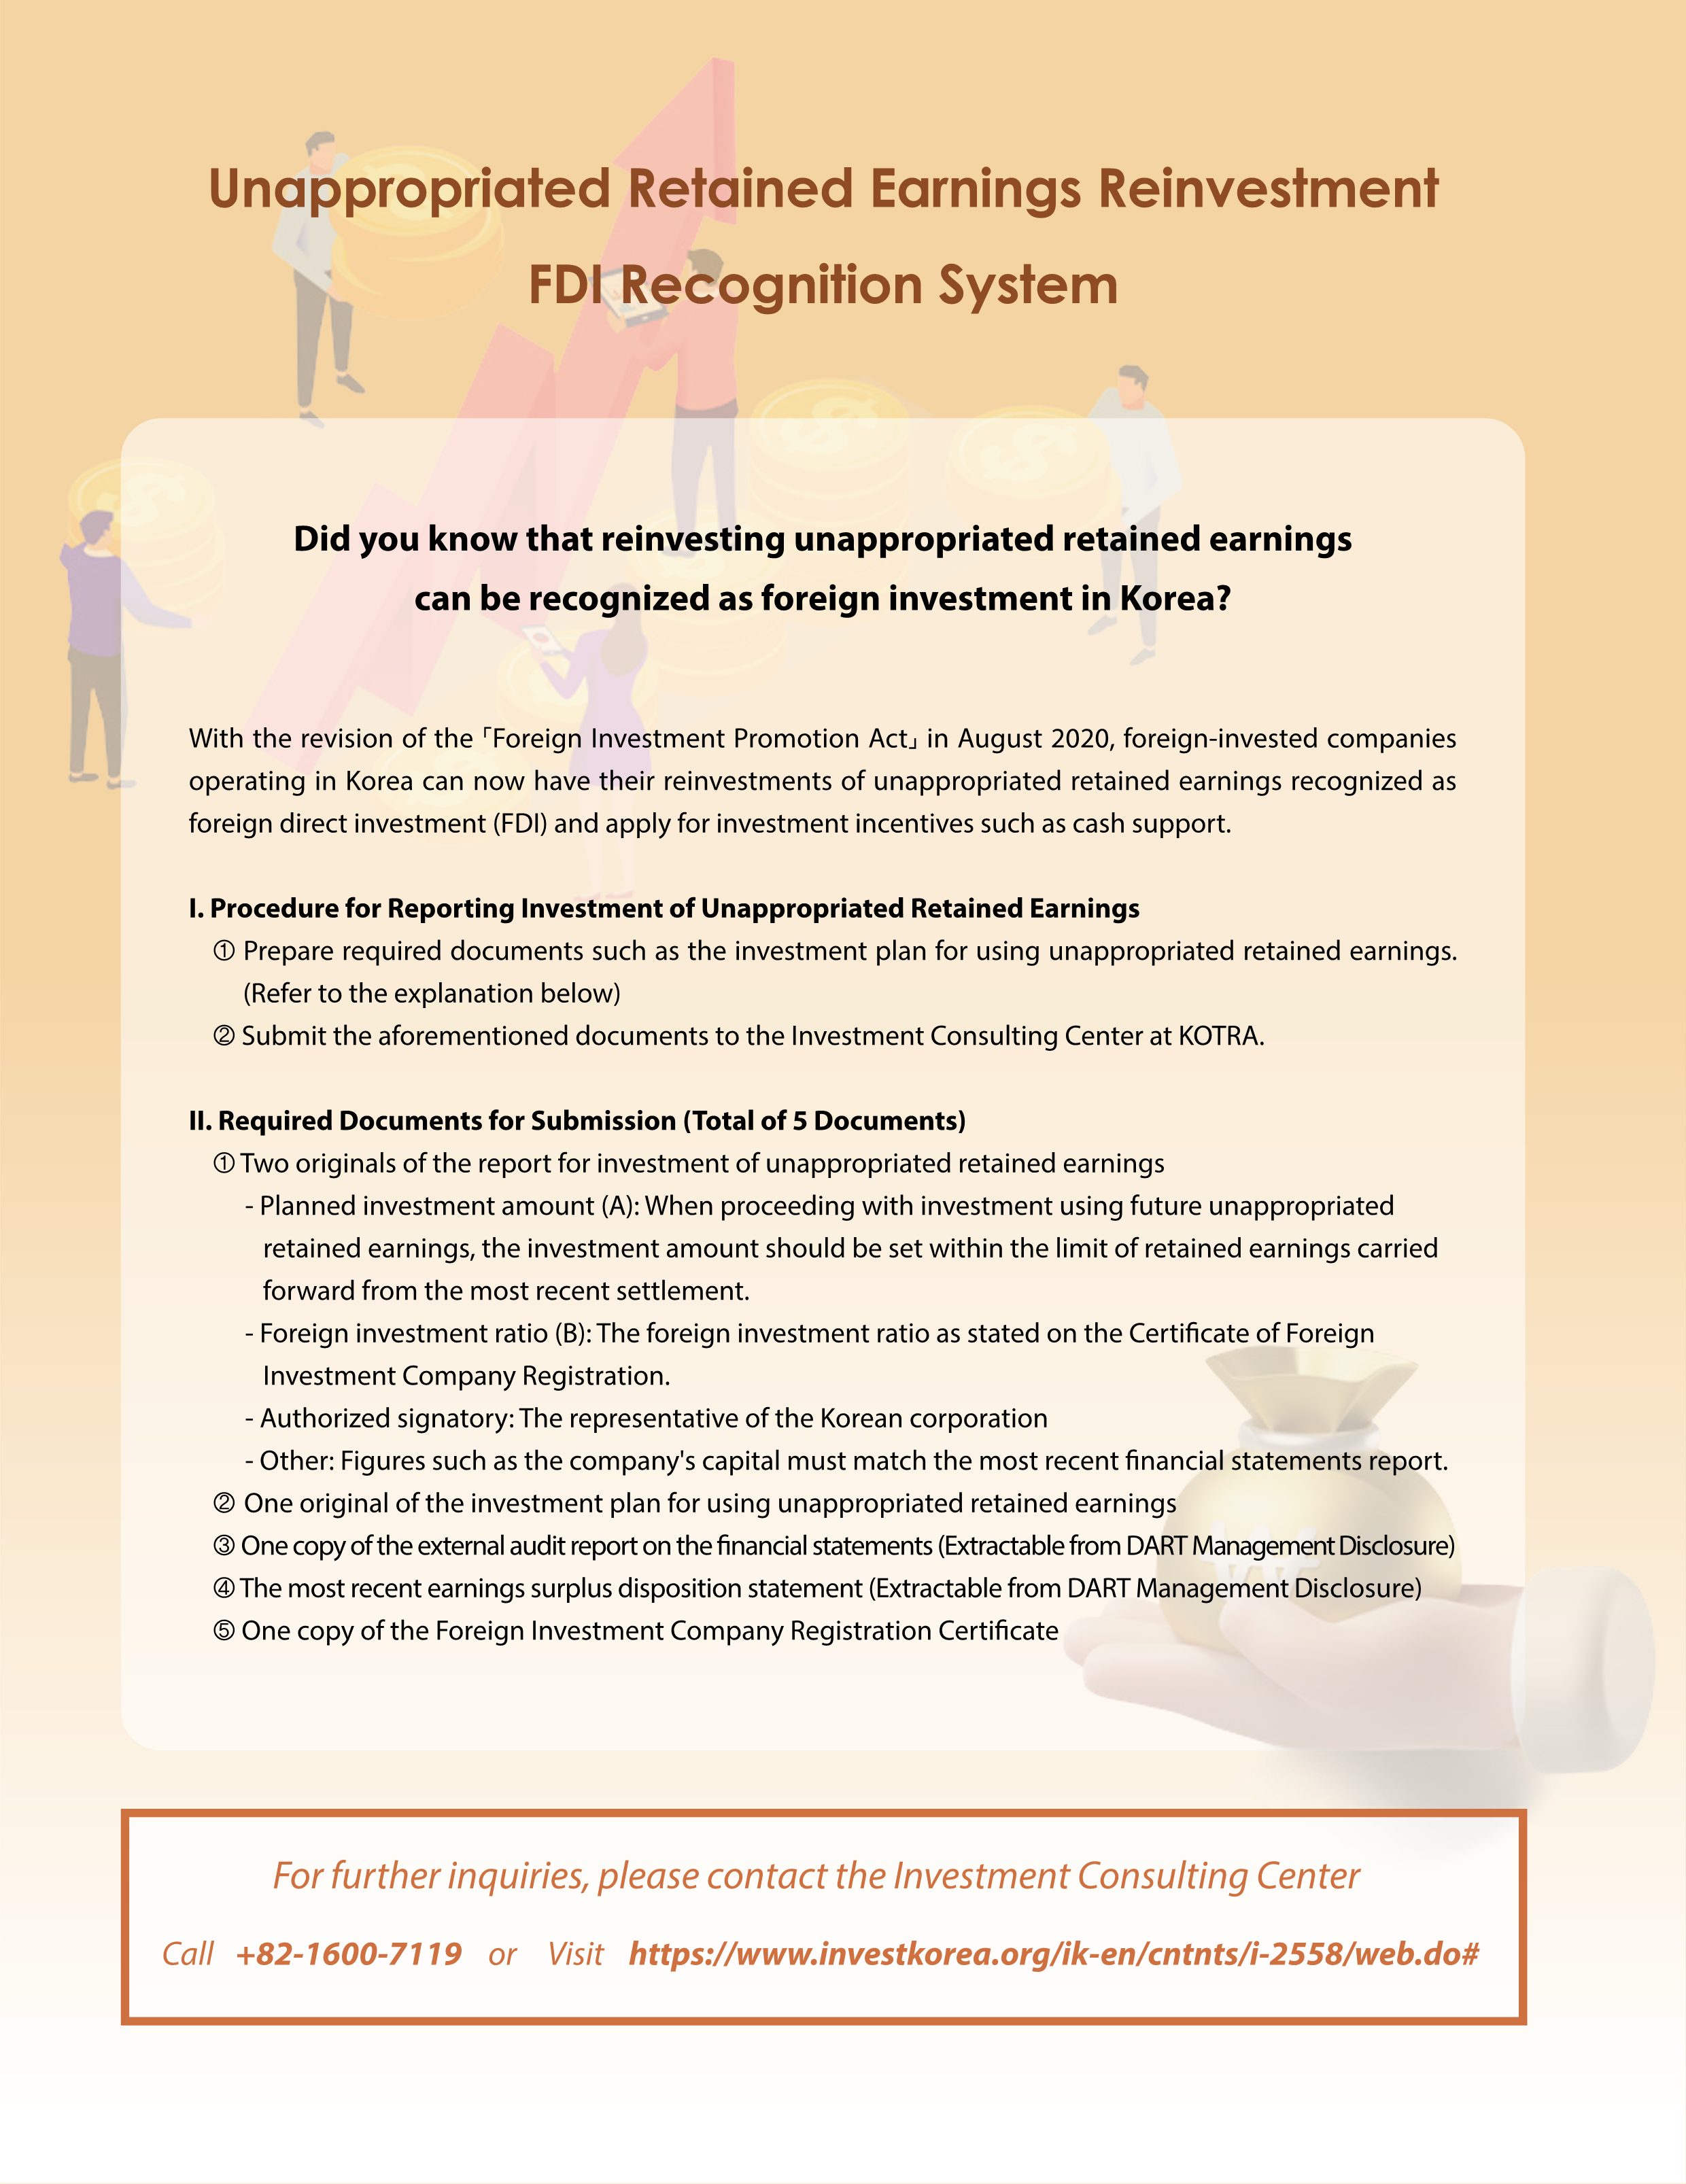 Unappropriated Retained Earnings Reinvestment FDI Recognition System